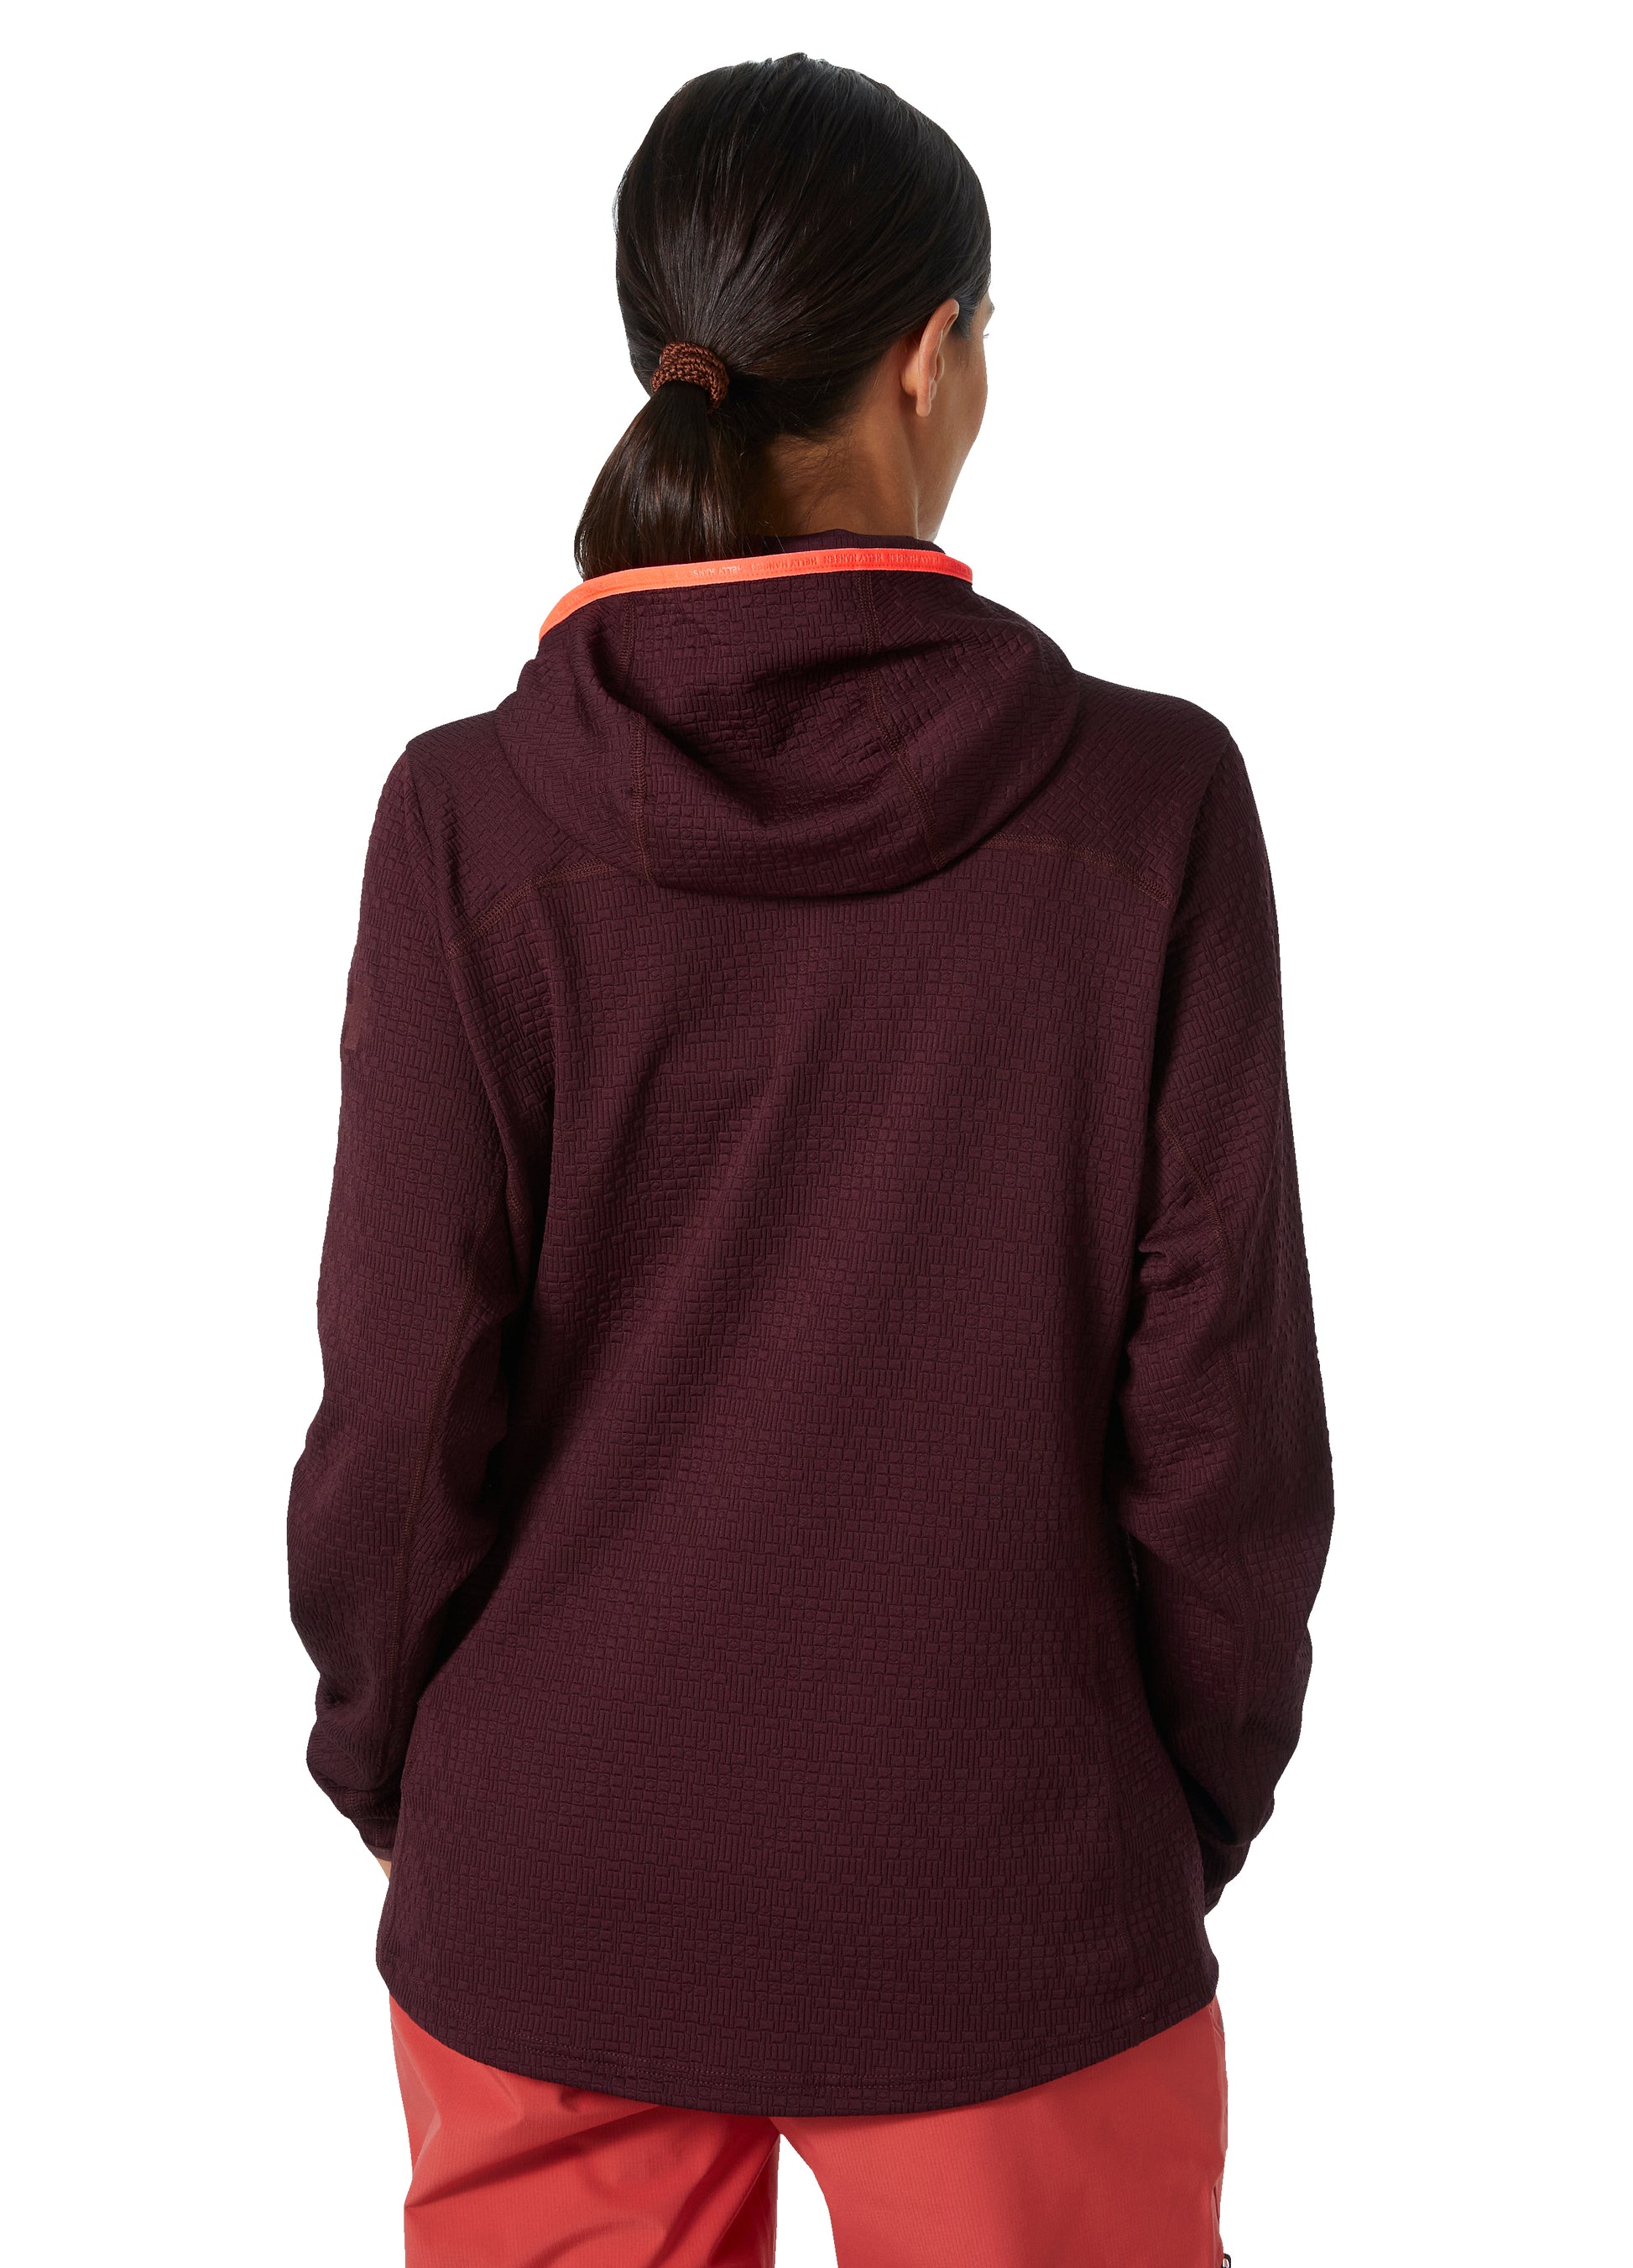 women's Helly Hansen Powderqeen Midlayer top - maroon with coral accents